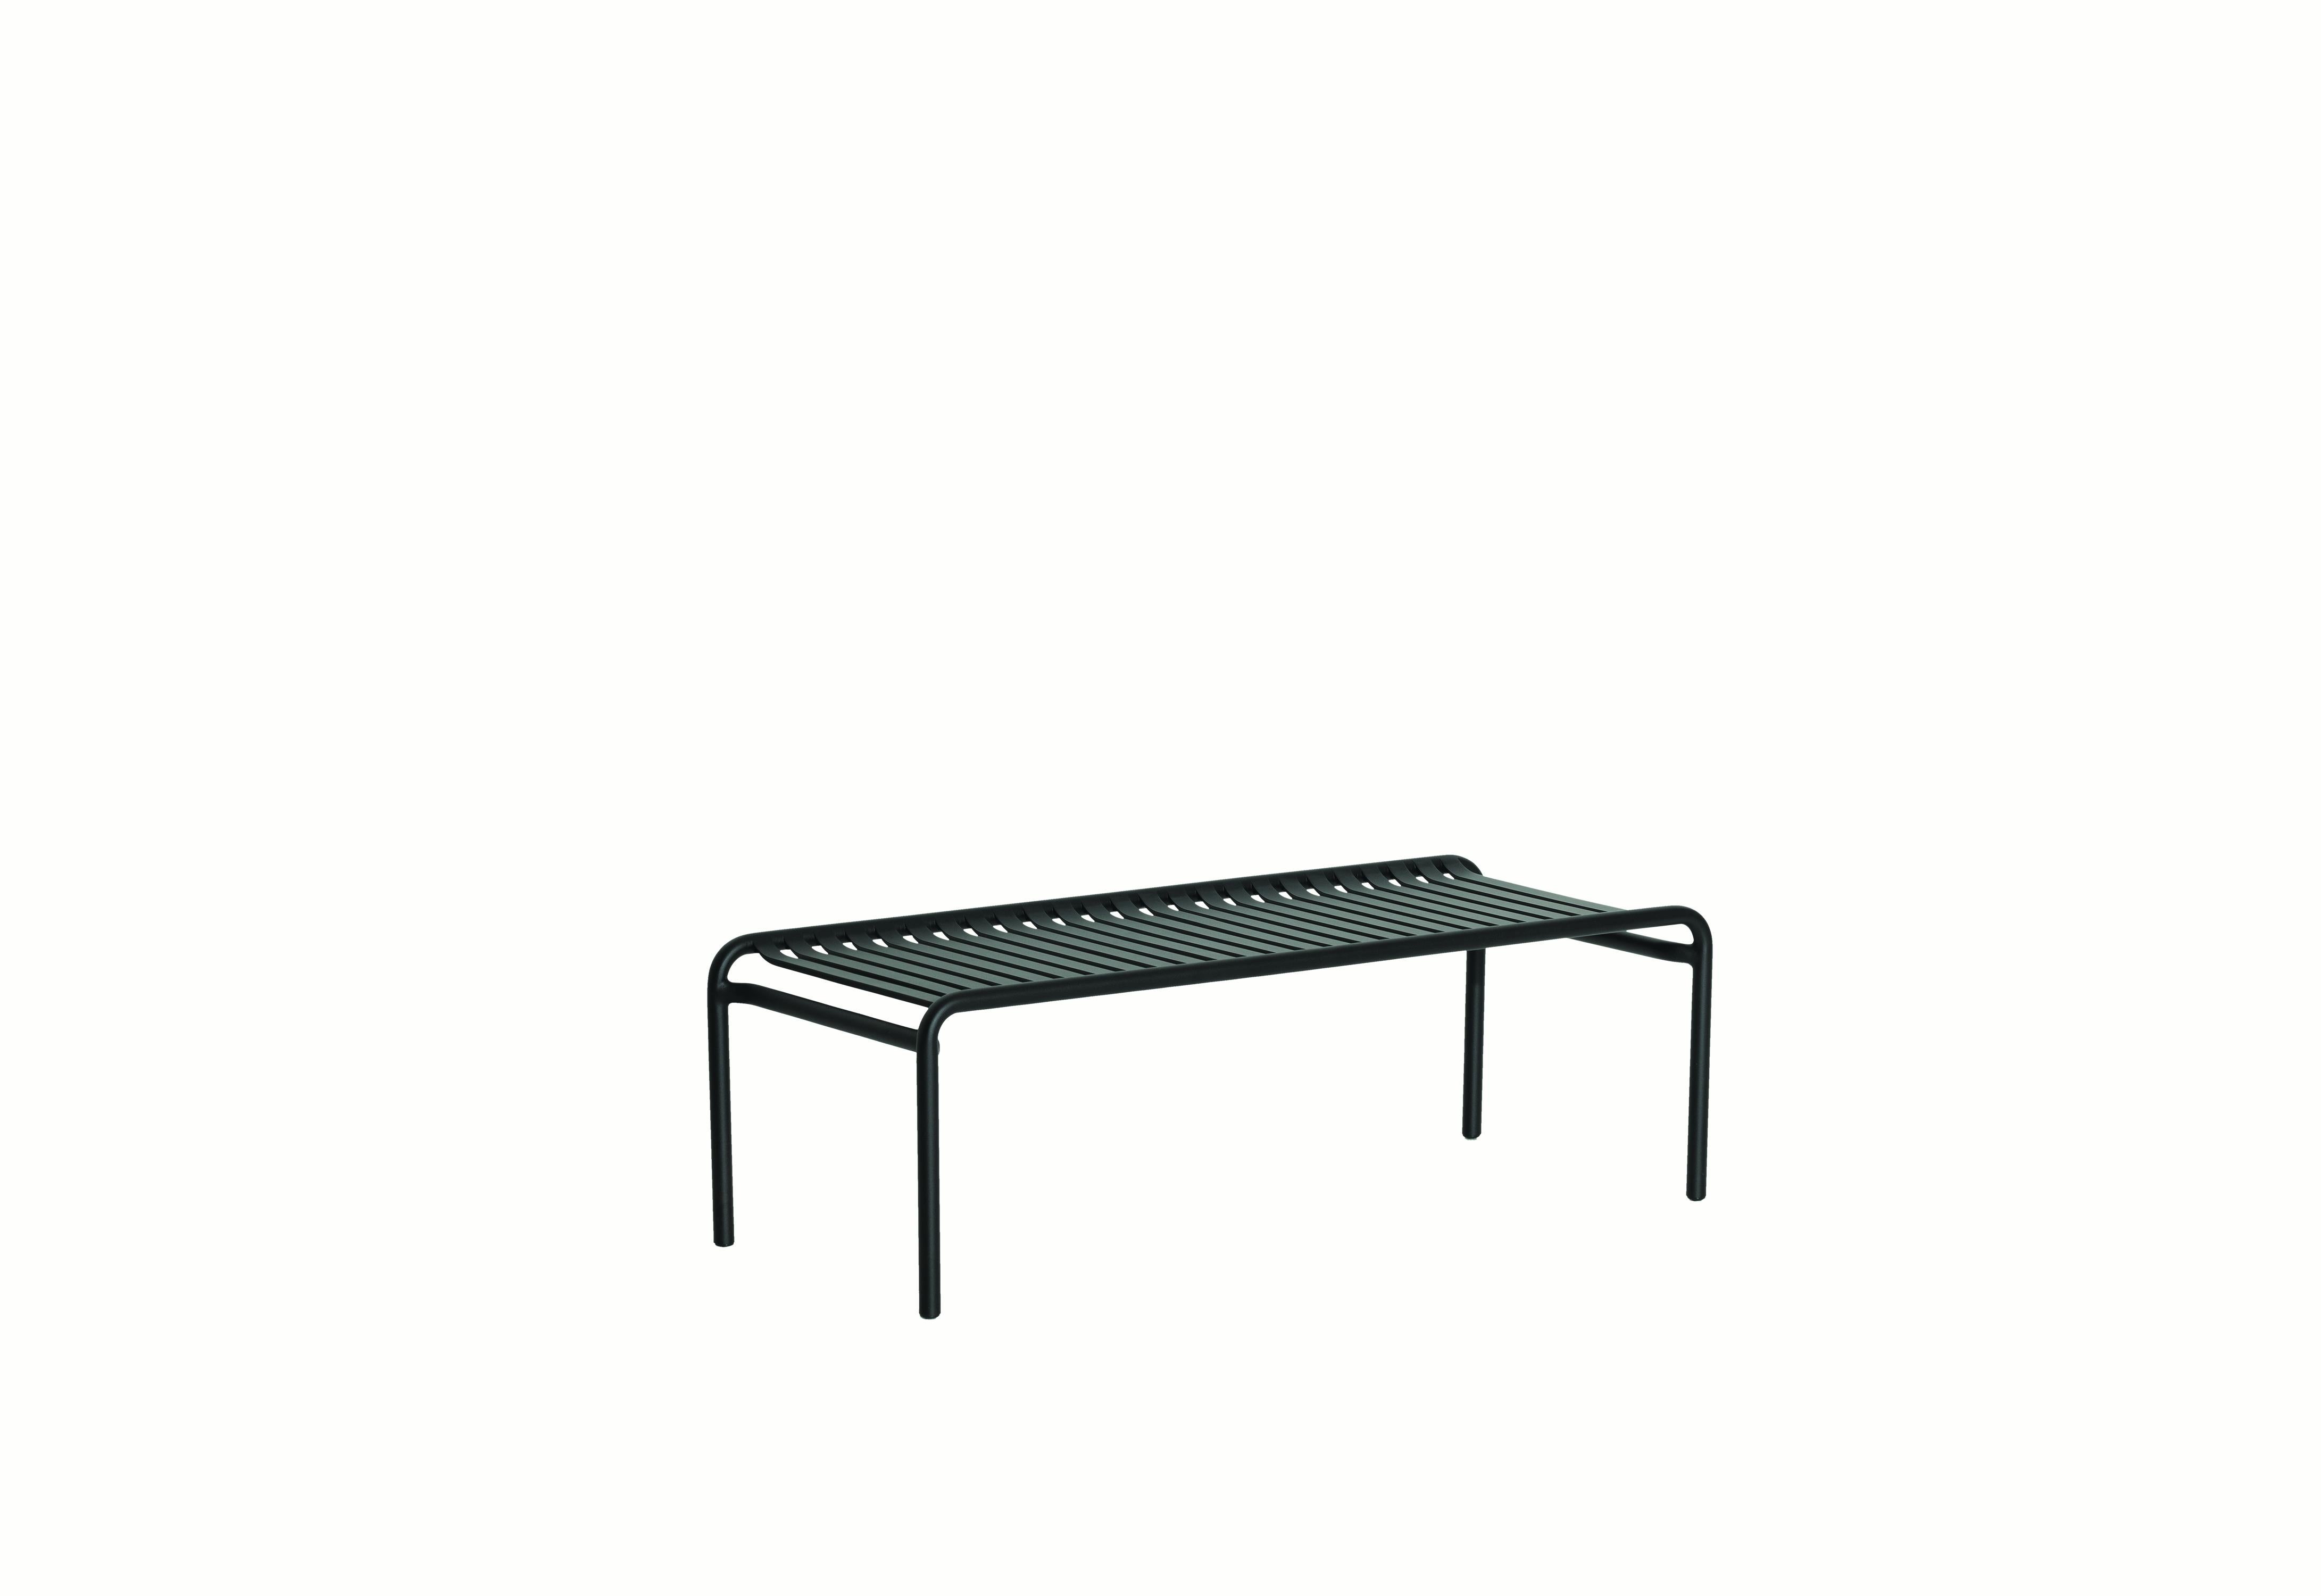 Petite Friture Week-End Long Coffee Table in Black Aluminium by Studio BrichetZiegler, 2017

The week-end collection is a full range of outdoor furniture, in aluminium grained epoxy paint, matt finish, that includes 18 functions and 8 colours for